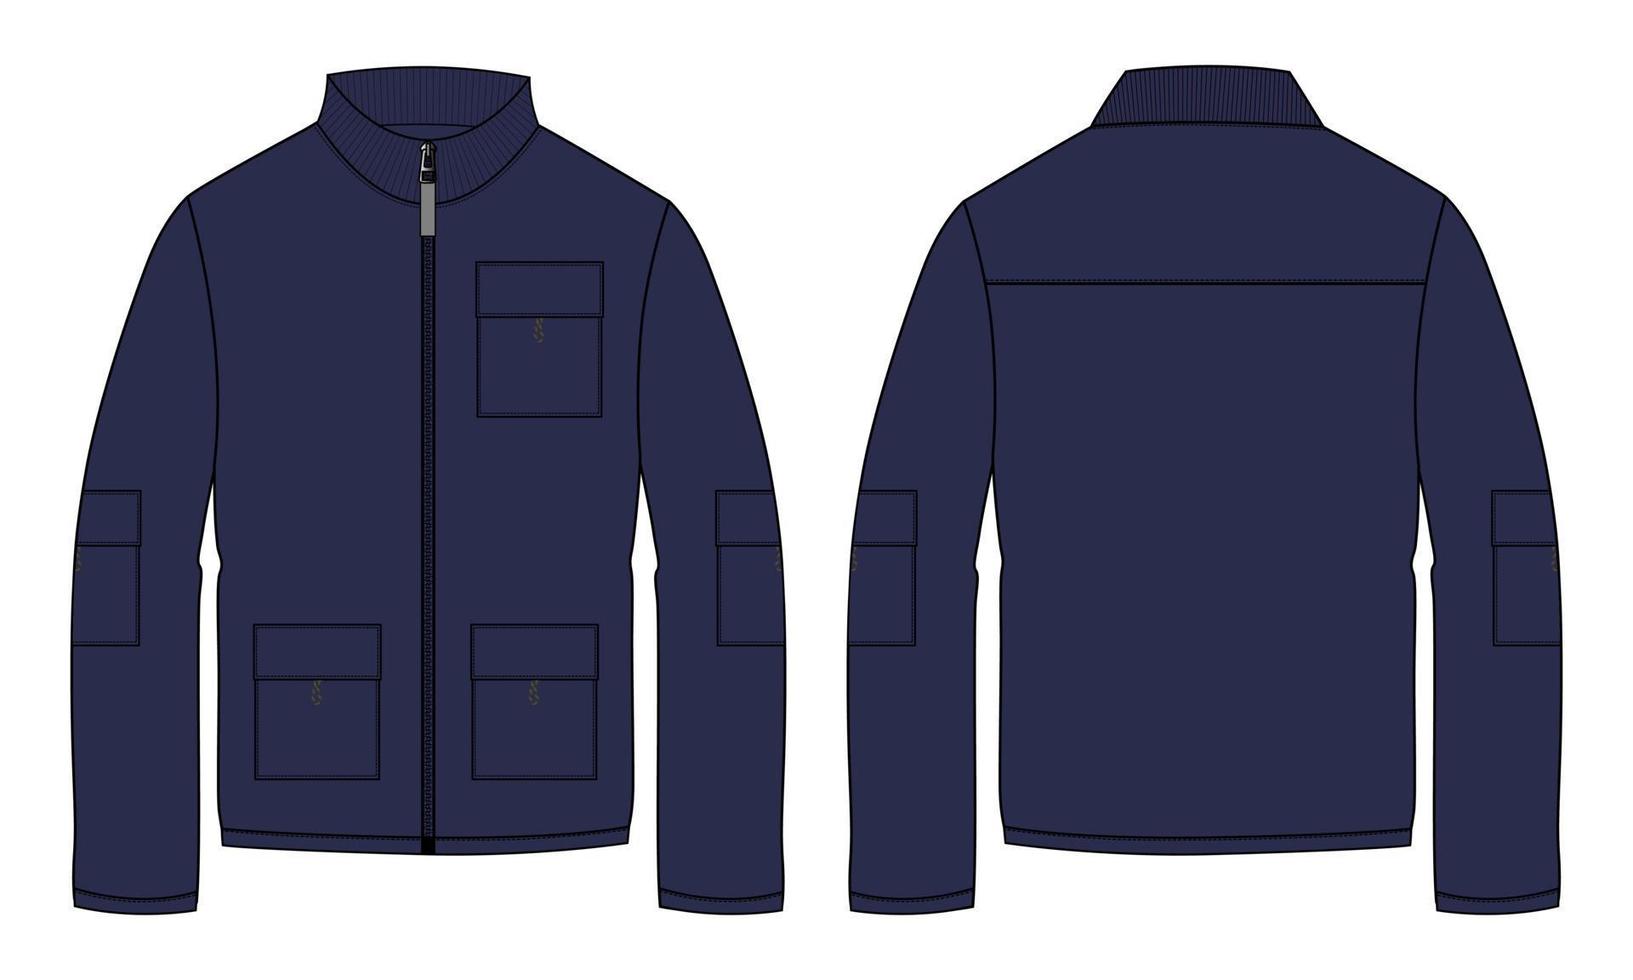 Long sleeve jacket with pocket and zipper technical fashion flat sketch vector illustration Navy Color template front and back views. Fleece jersey sweatshirt jacket for men's and boys.